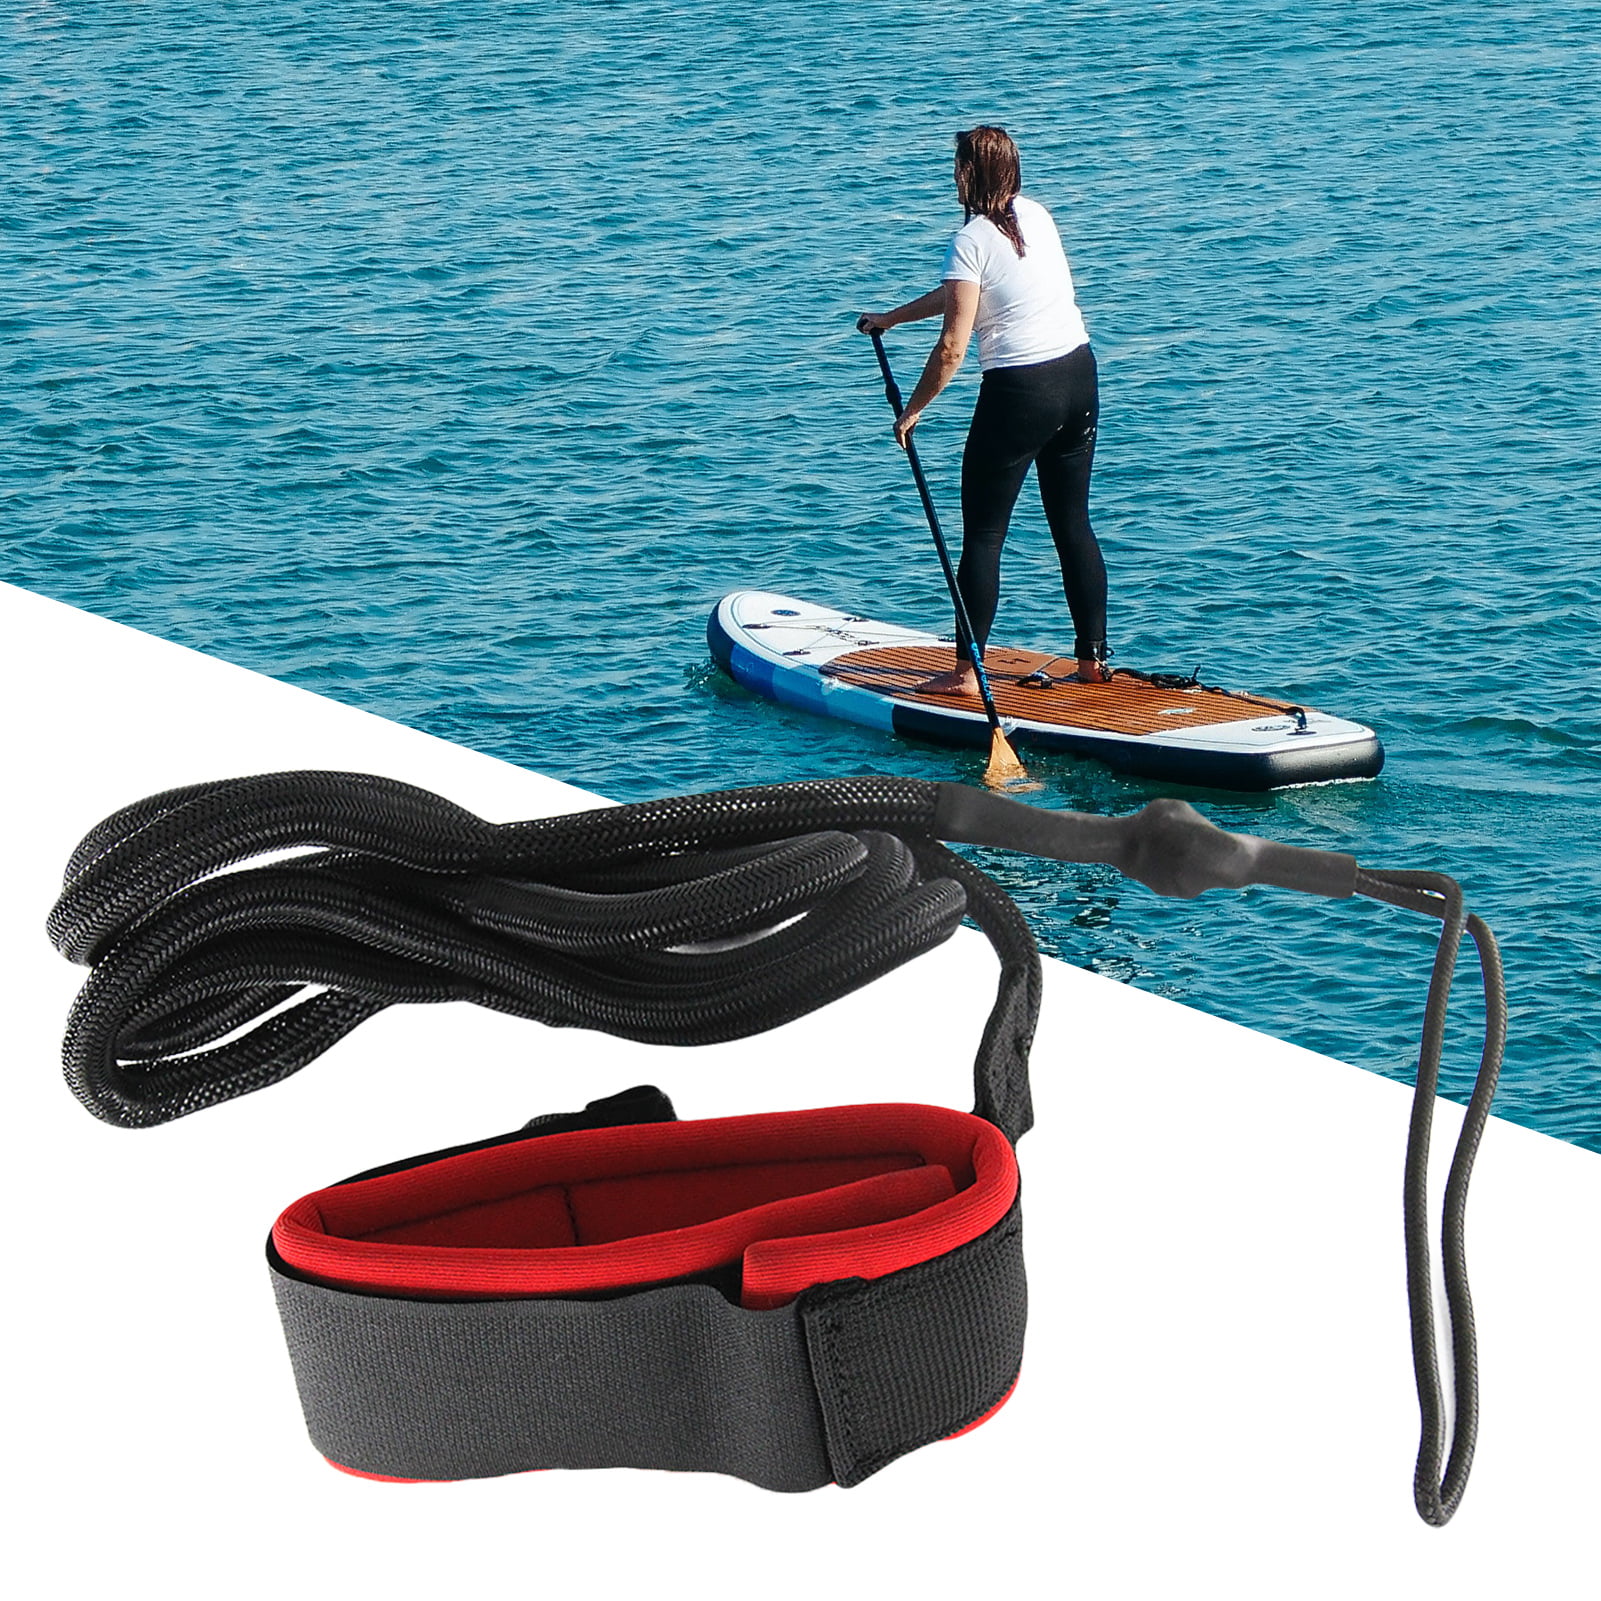 Surfboard Leash for Ankle Beach Accessories for Adults 6ft 7ft 9ft Maximum Strength Lightweight Kink-Free for Short Board Long Board SUP Paddle Board Paddleboard Boogie Boards 